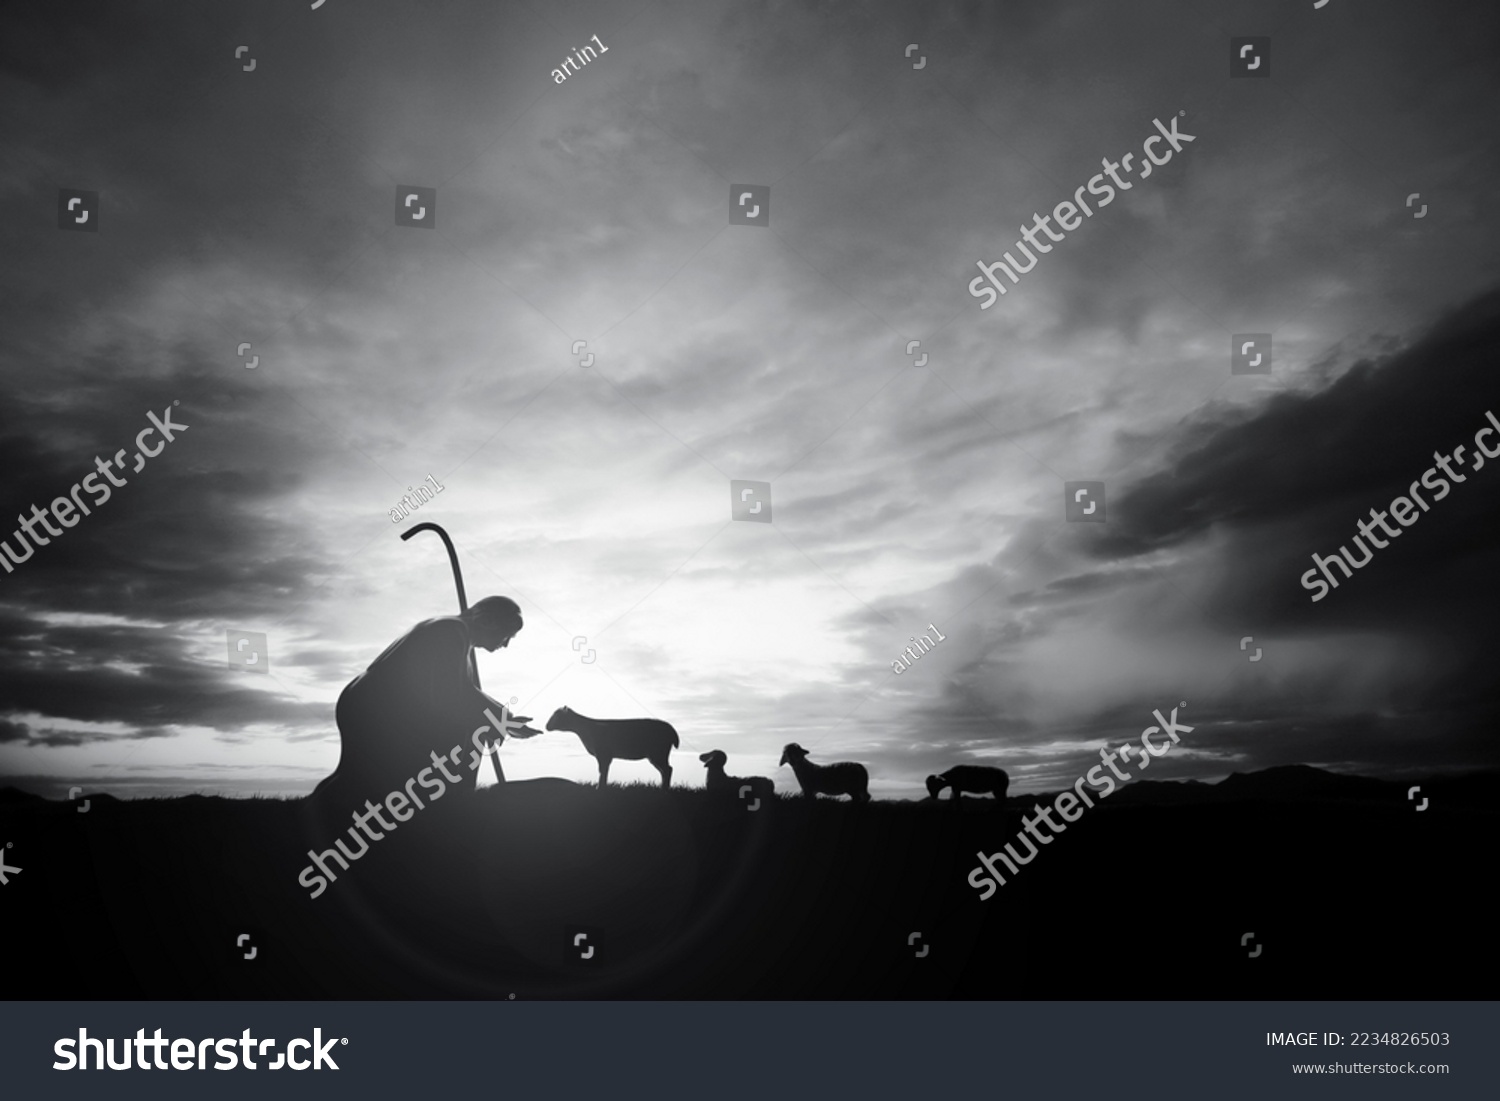 Shepherd Jesus Christ taking care of the lamb and a flock of sheep on the meadow with a brightly rising sunrise landscape
 #2234826503